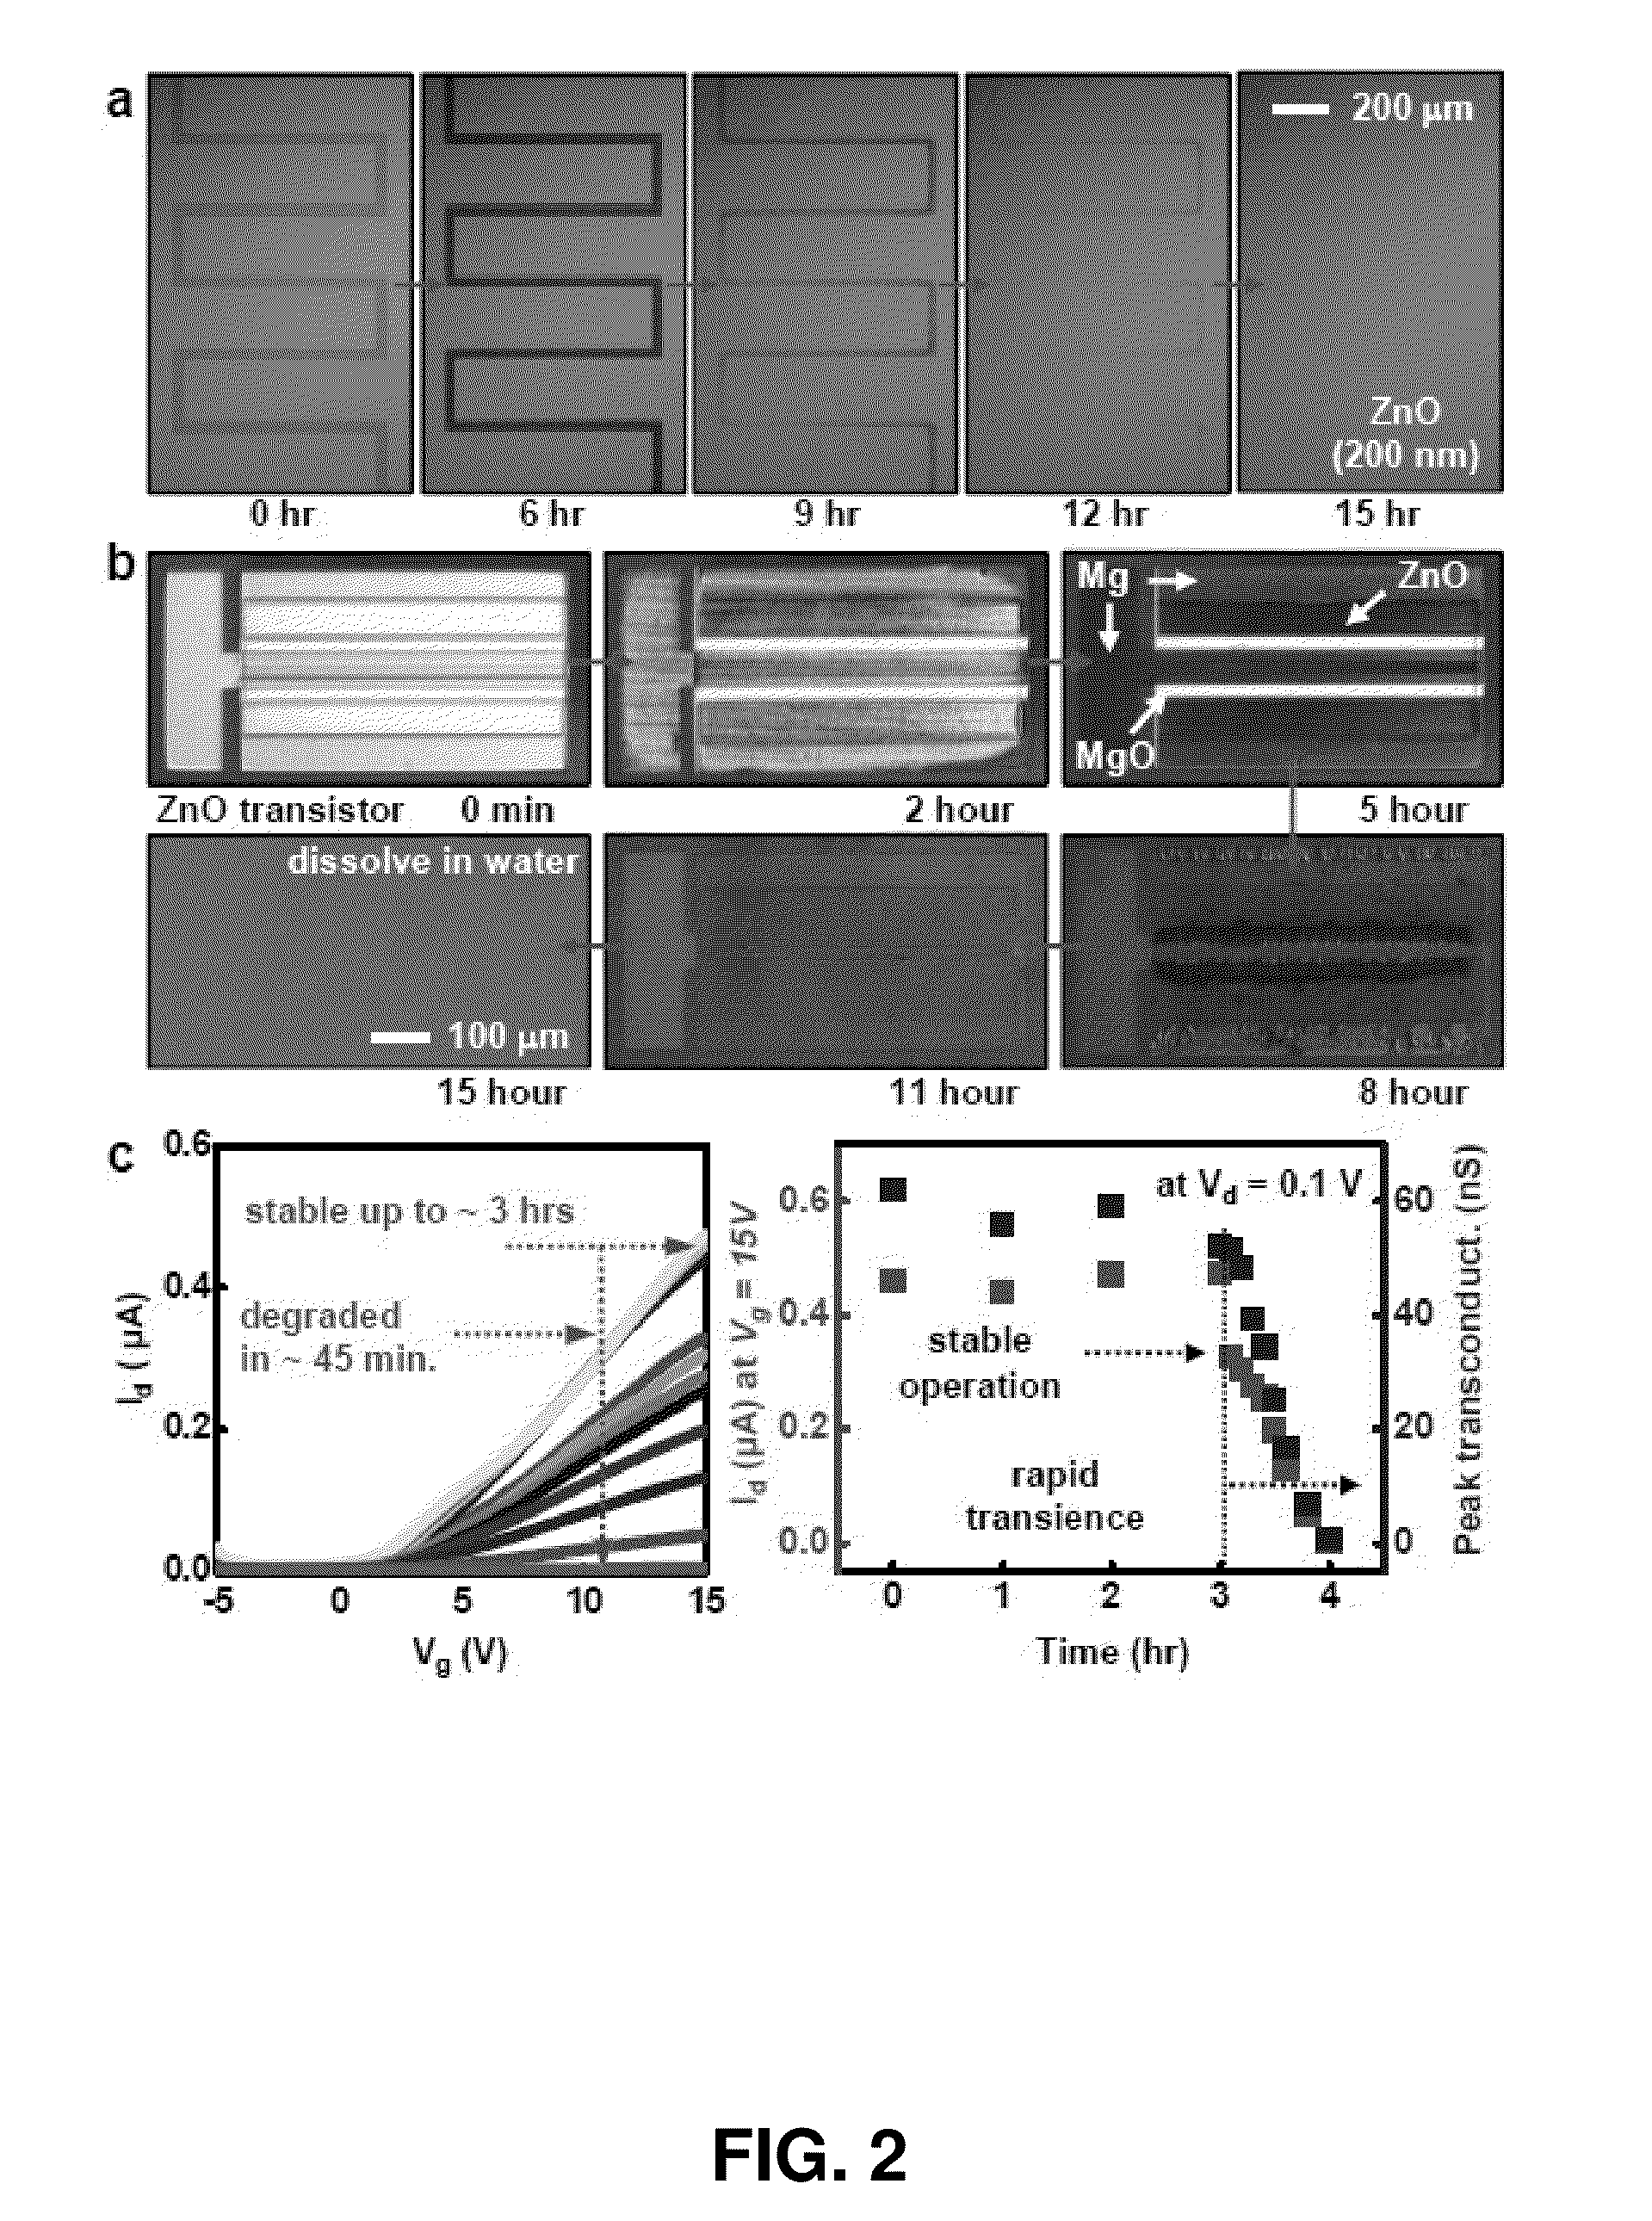 Biodegradable materials for multilayer transient printed circuit boards